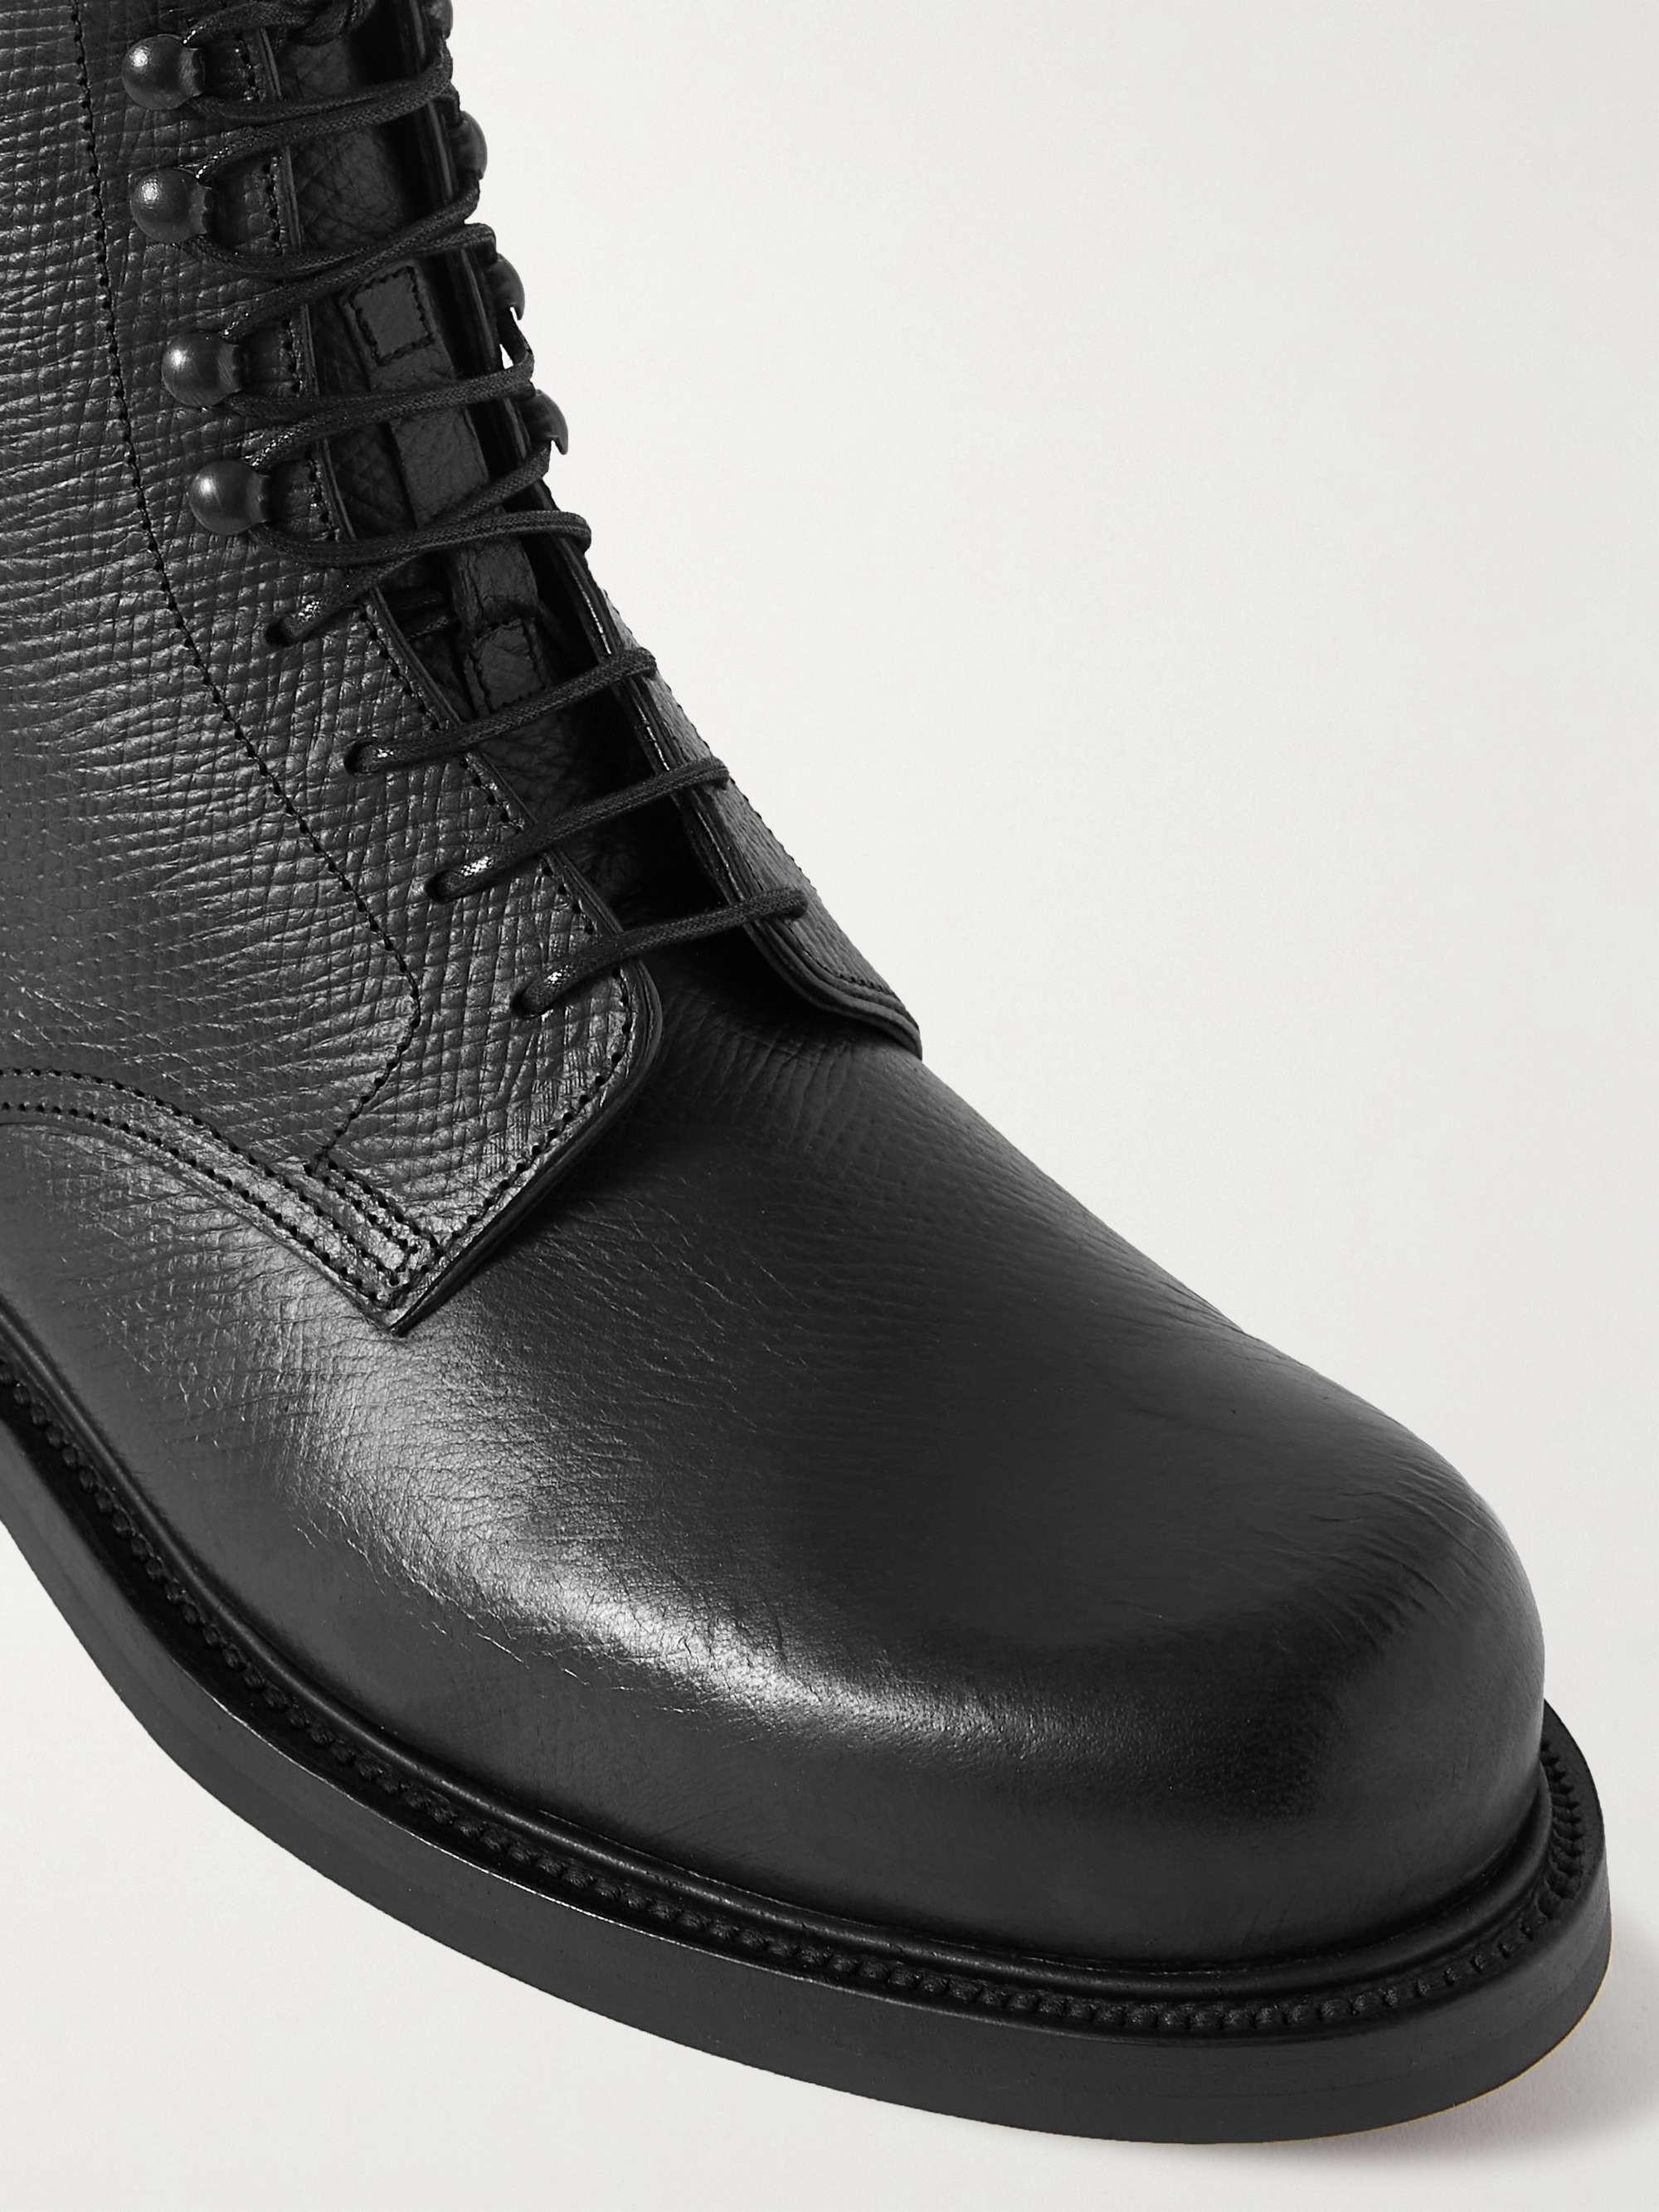 GEORGE CLEVERLEY Taron 2 Full-Grain Leather Derby Boots